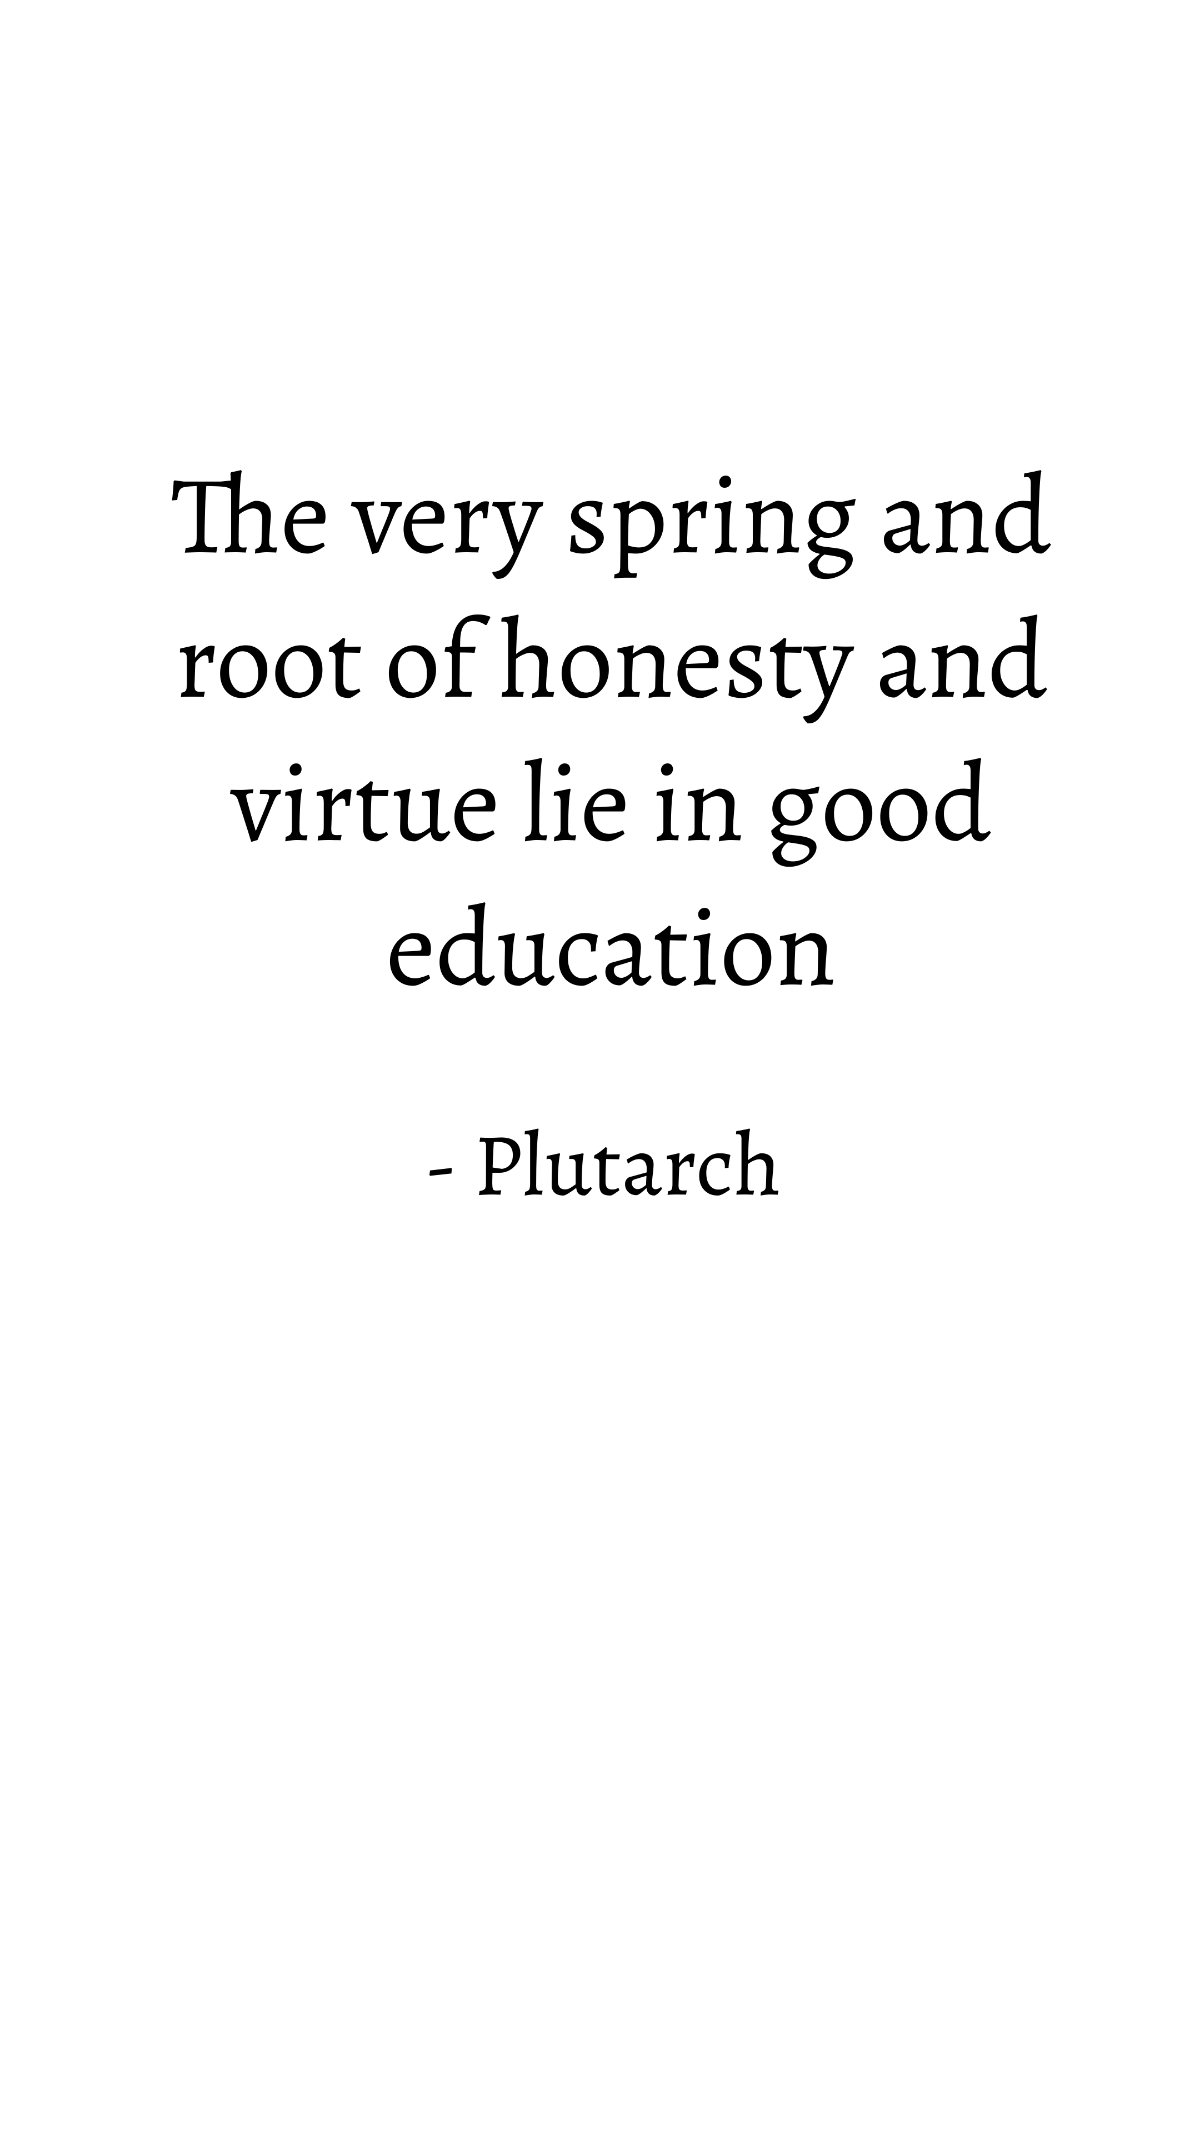 Plutarch - The very spring and root of honesty and virtue lie in good education Template